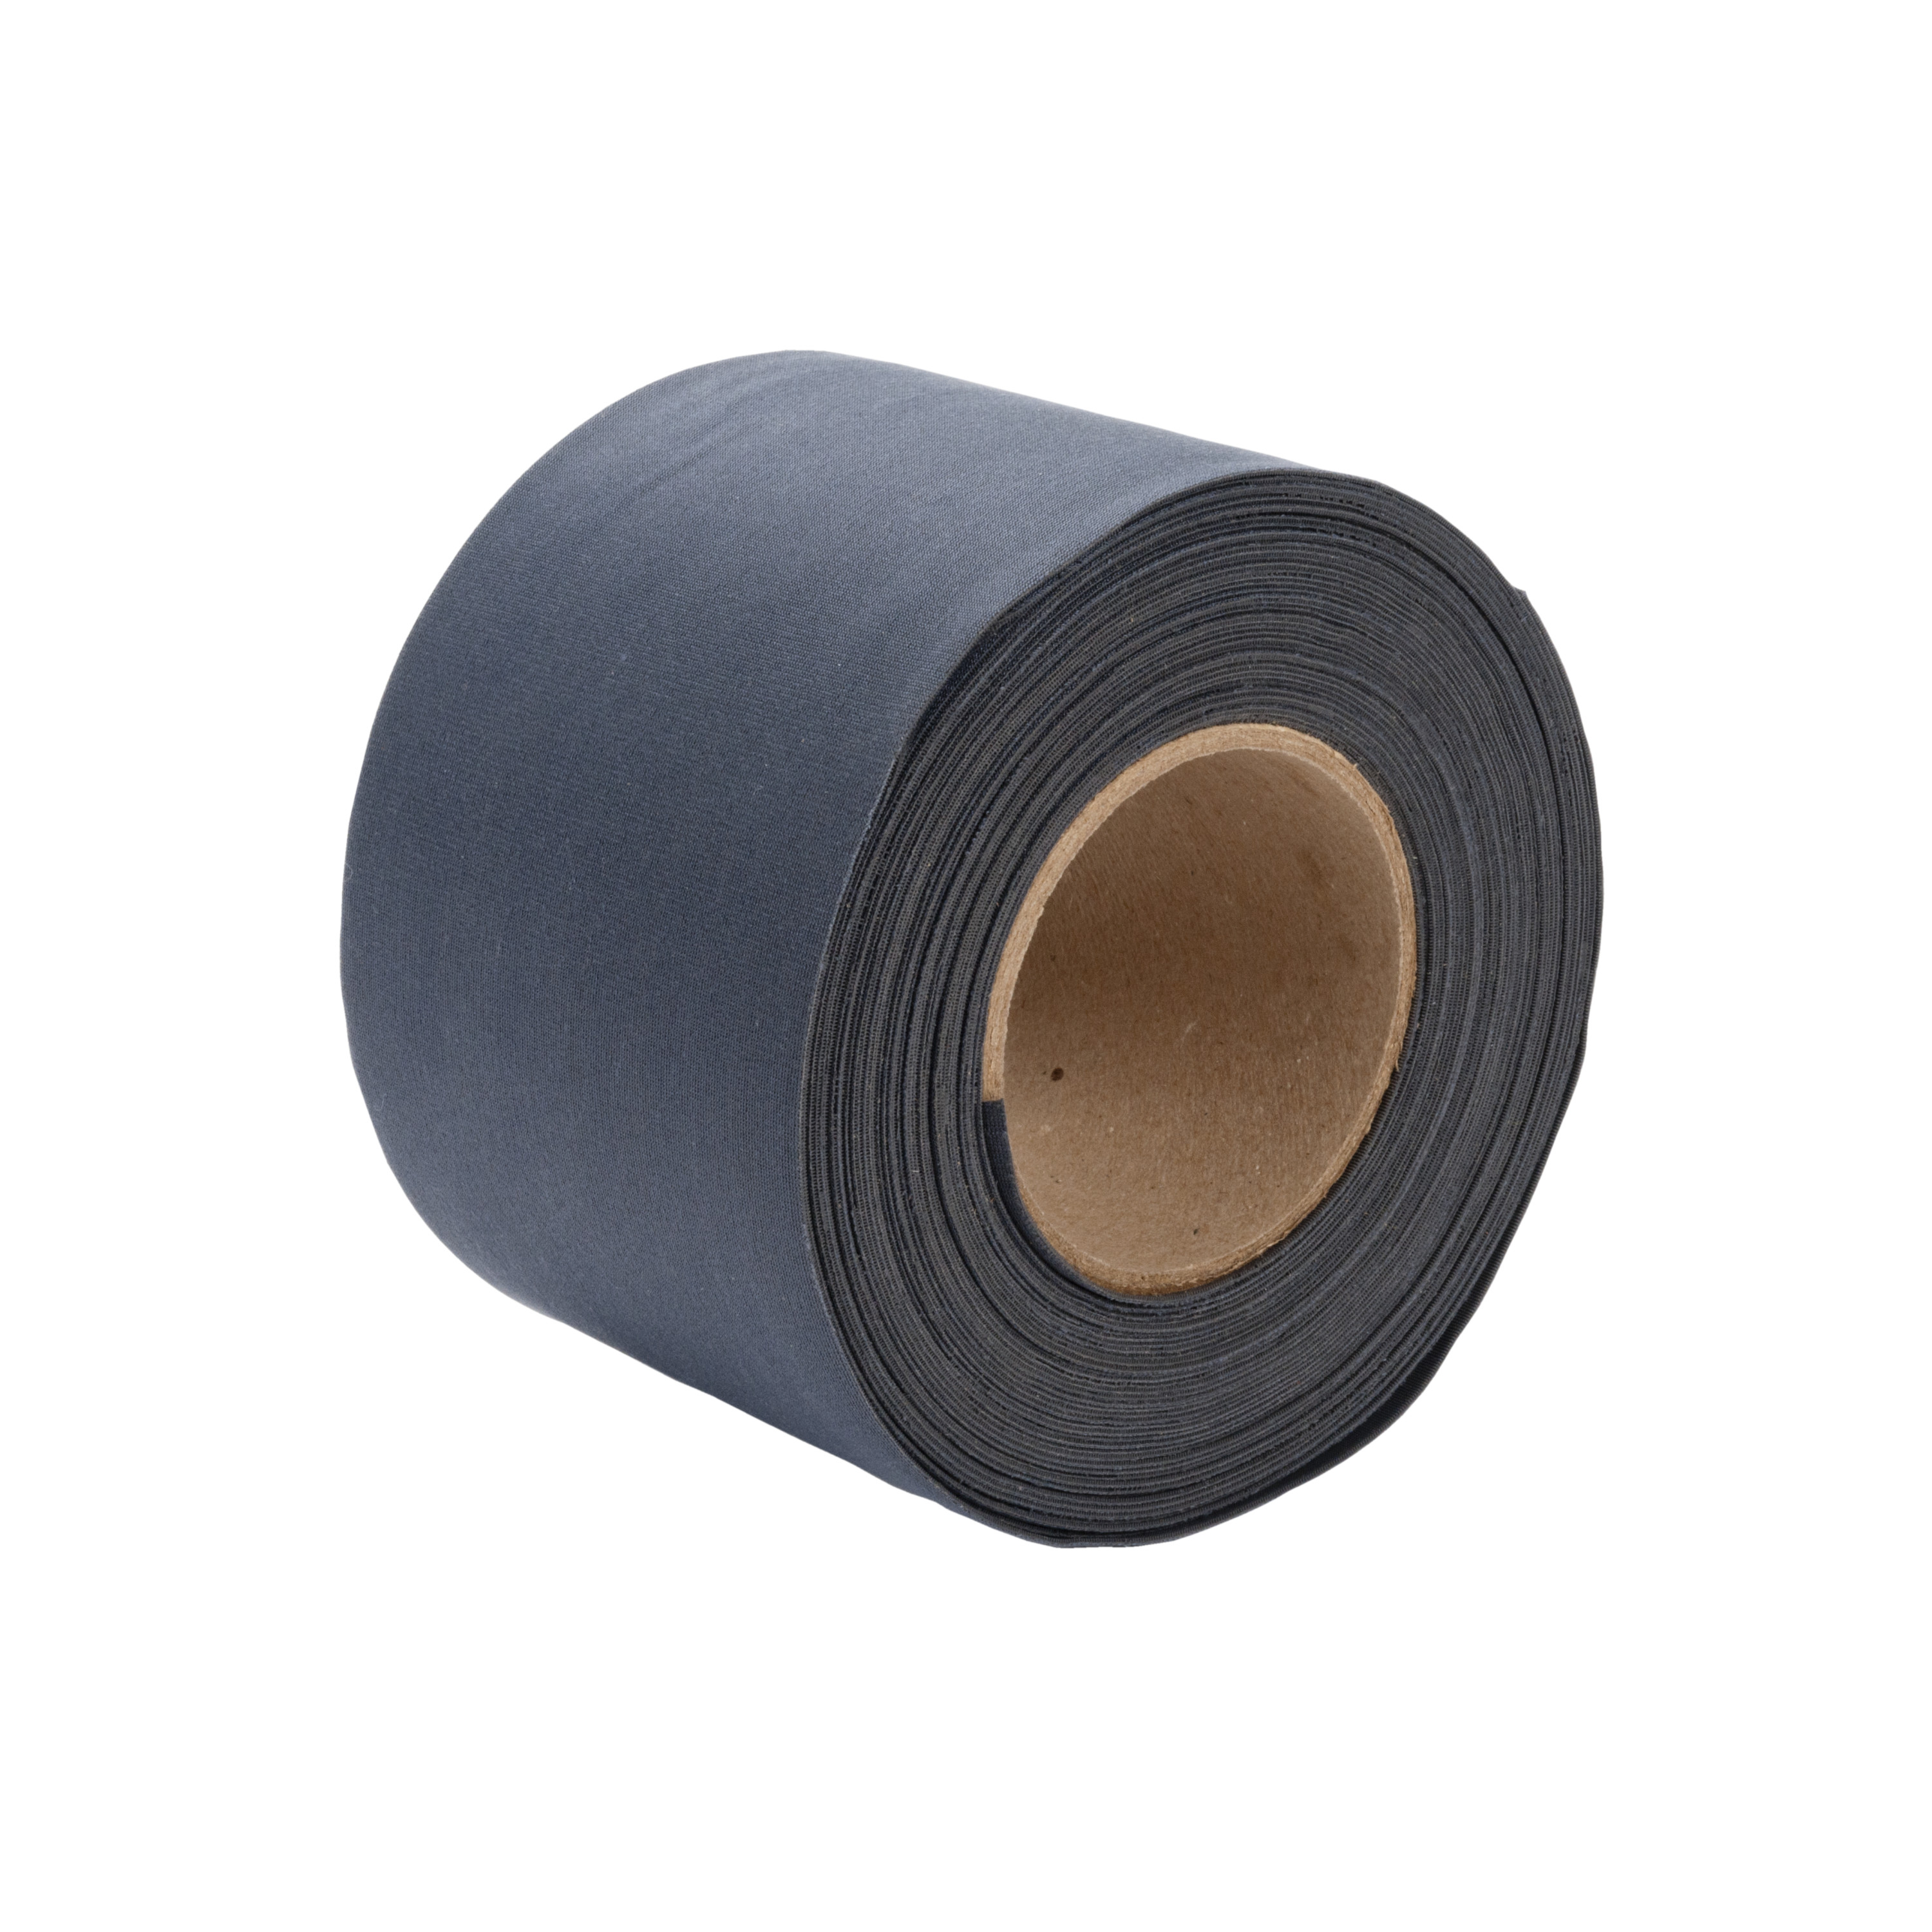 3M™ Gripping Material GM630, Gray, 24 in X 72 yd, 1 roll per case